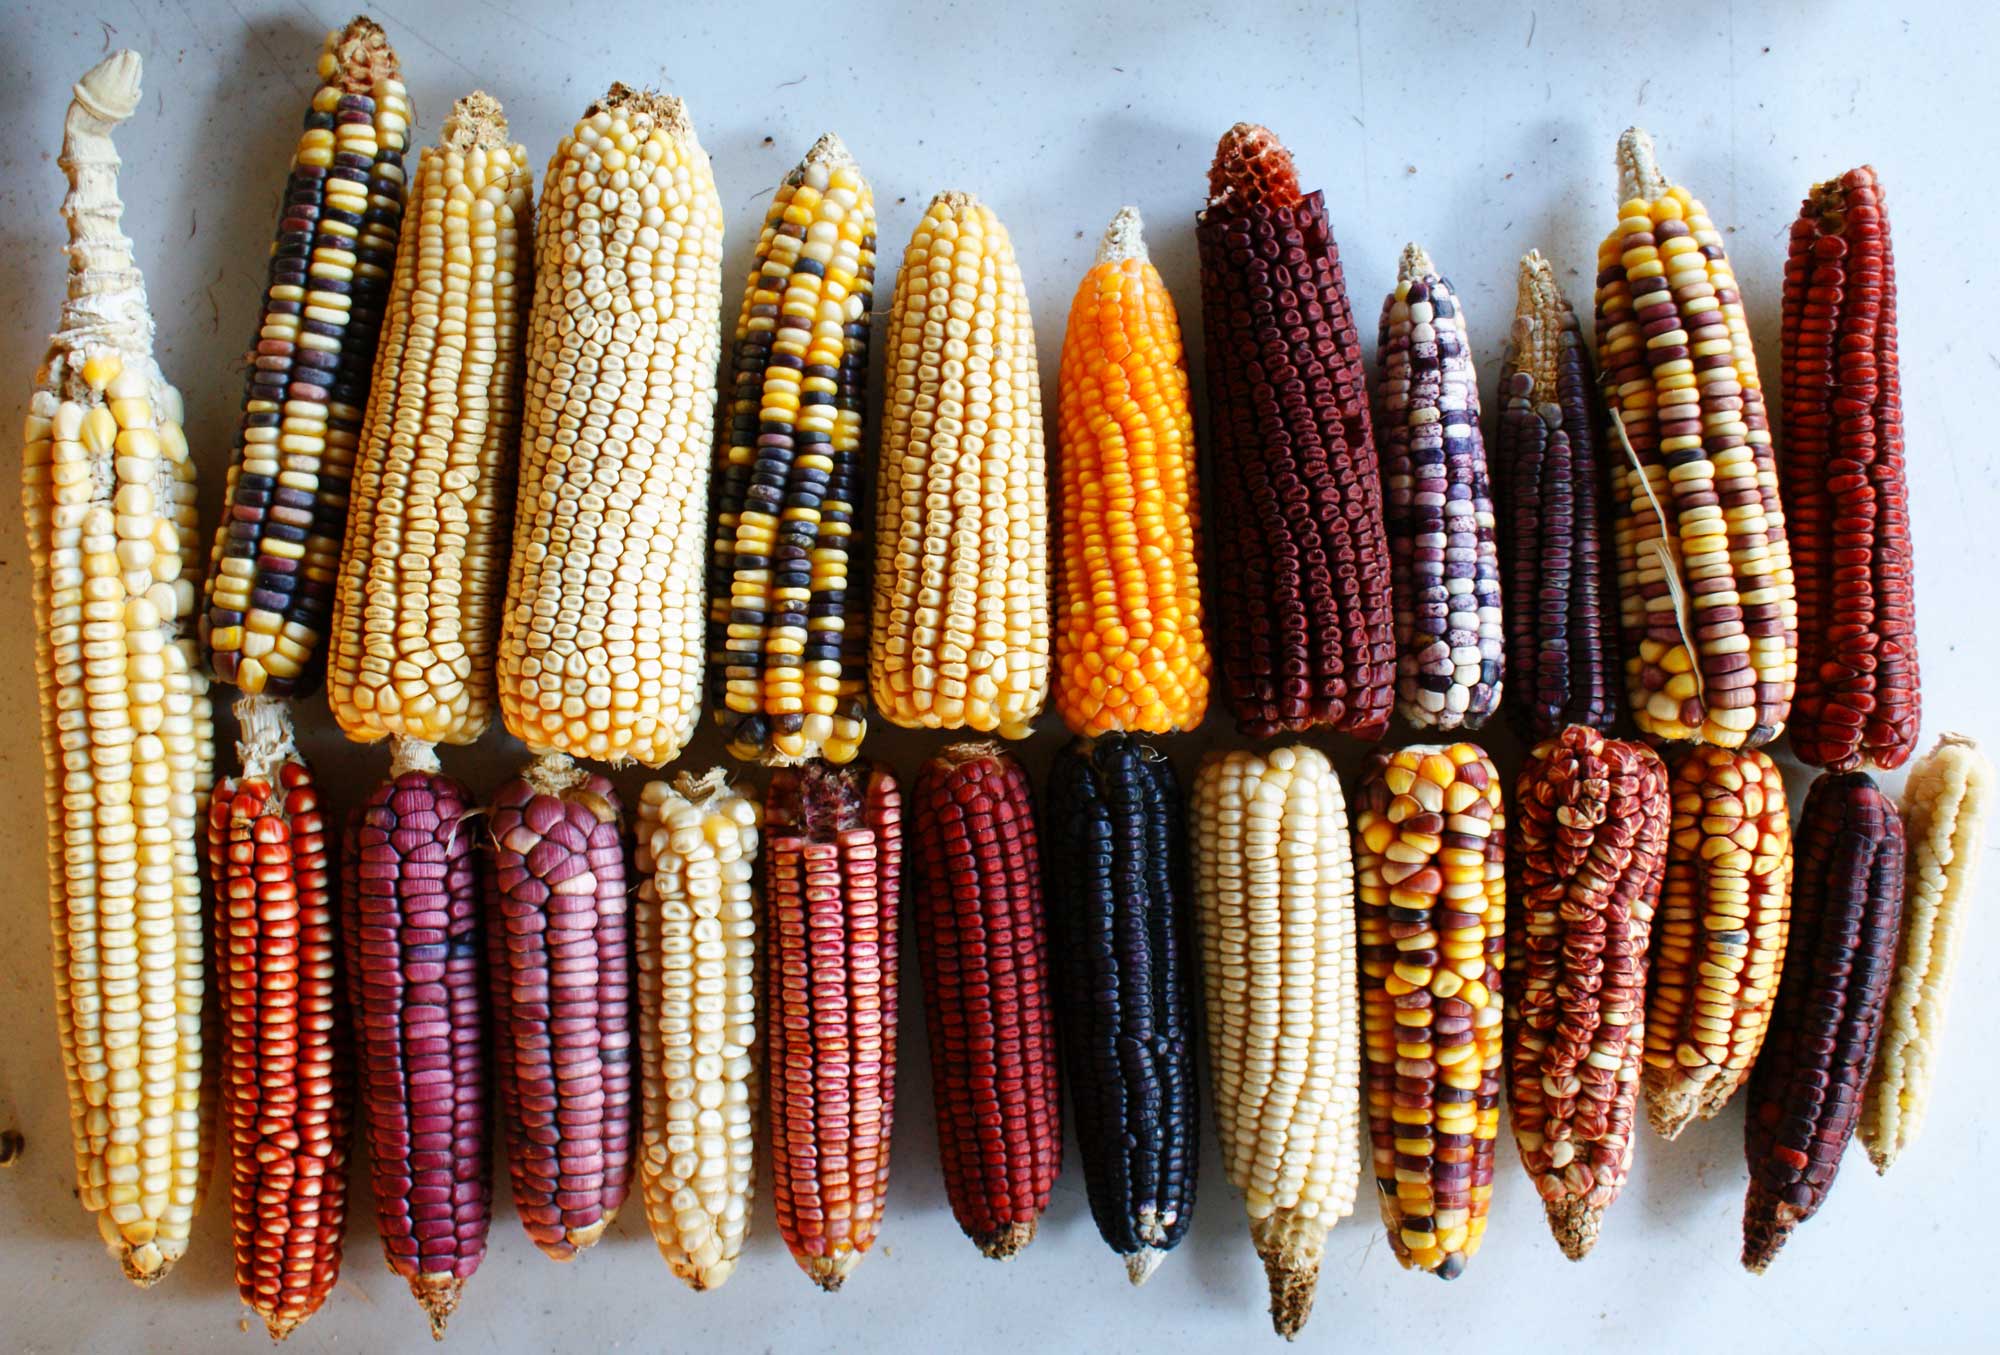 Photograph of maize (corn) ears from Mexico on a white background. The ears have kernels of various colors, from dull yellow to bright yellow to pink, dark red, and nearly black. Some ears have kernels of more than one color, and some ears have kernels of a single color.